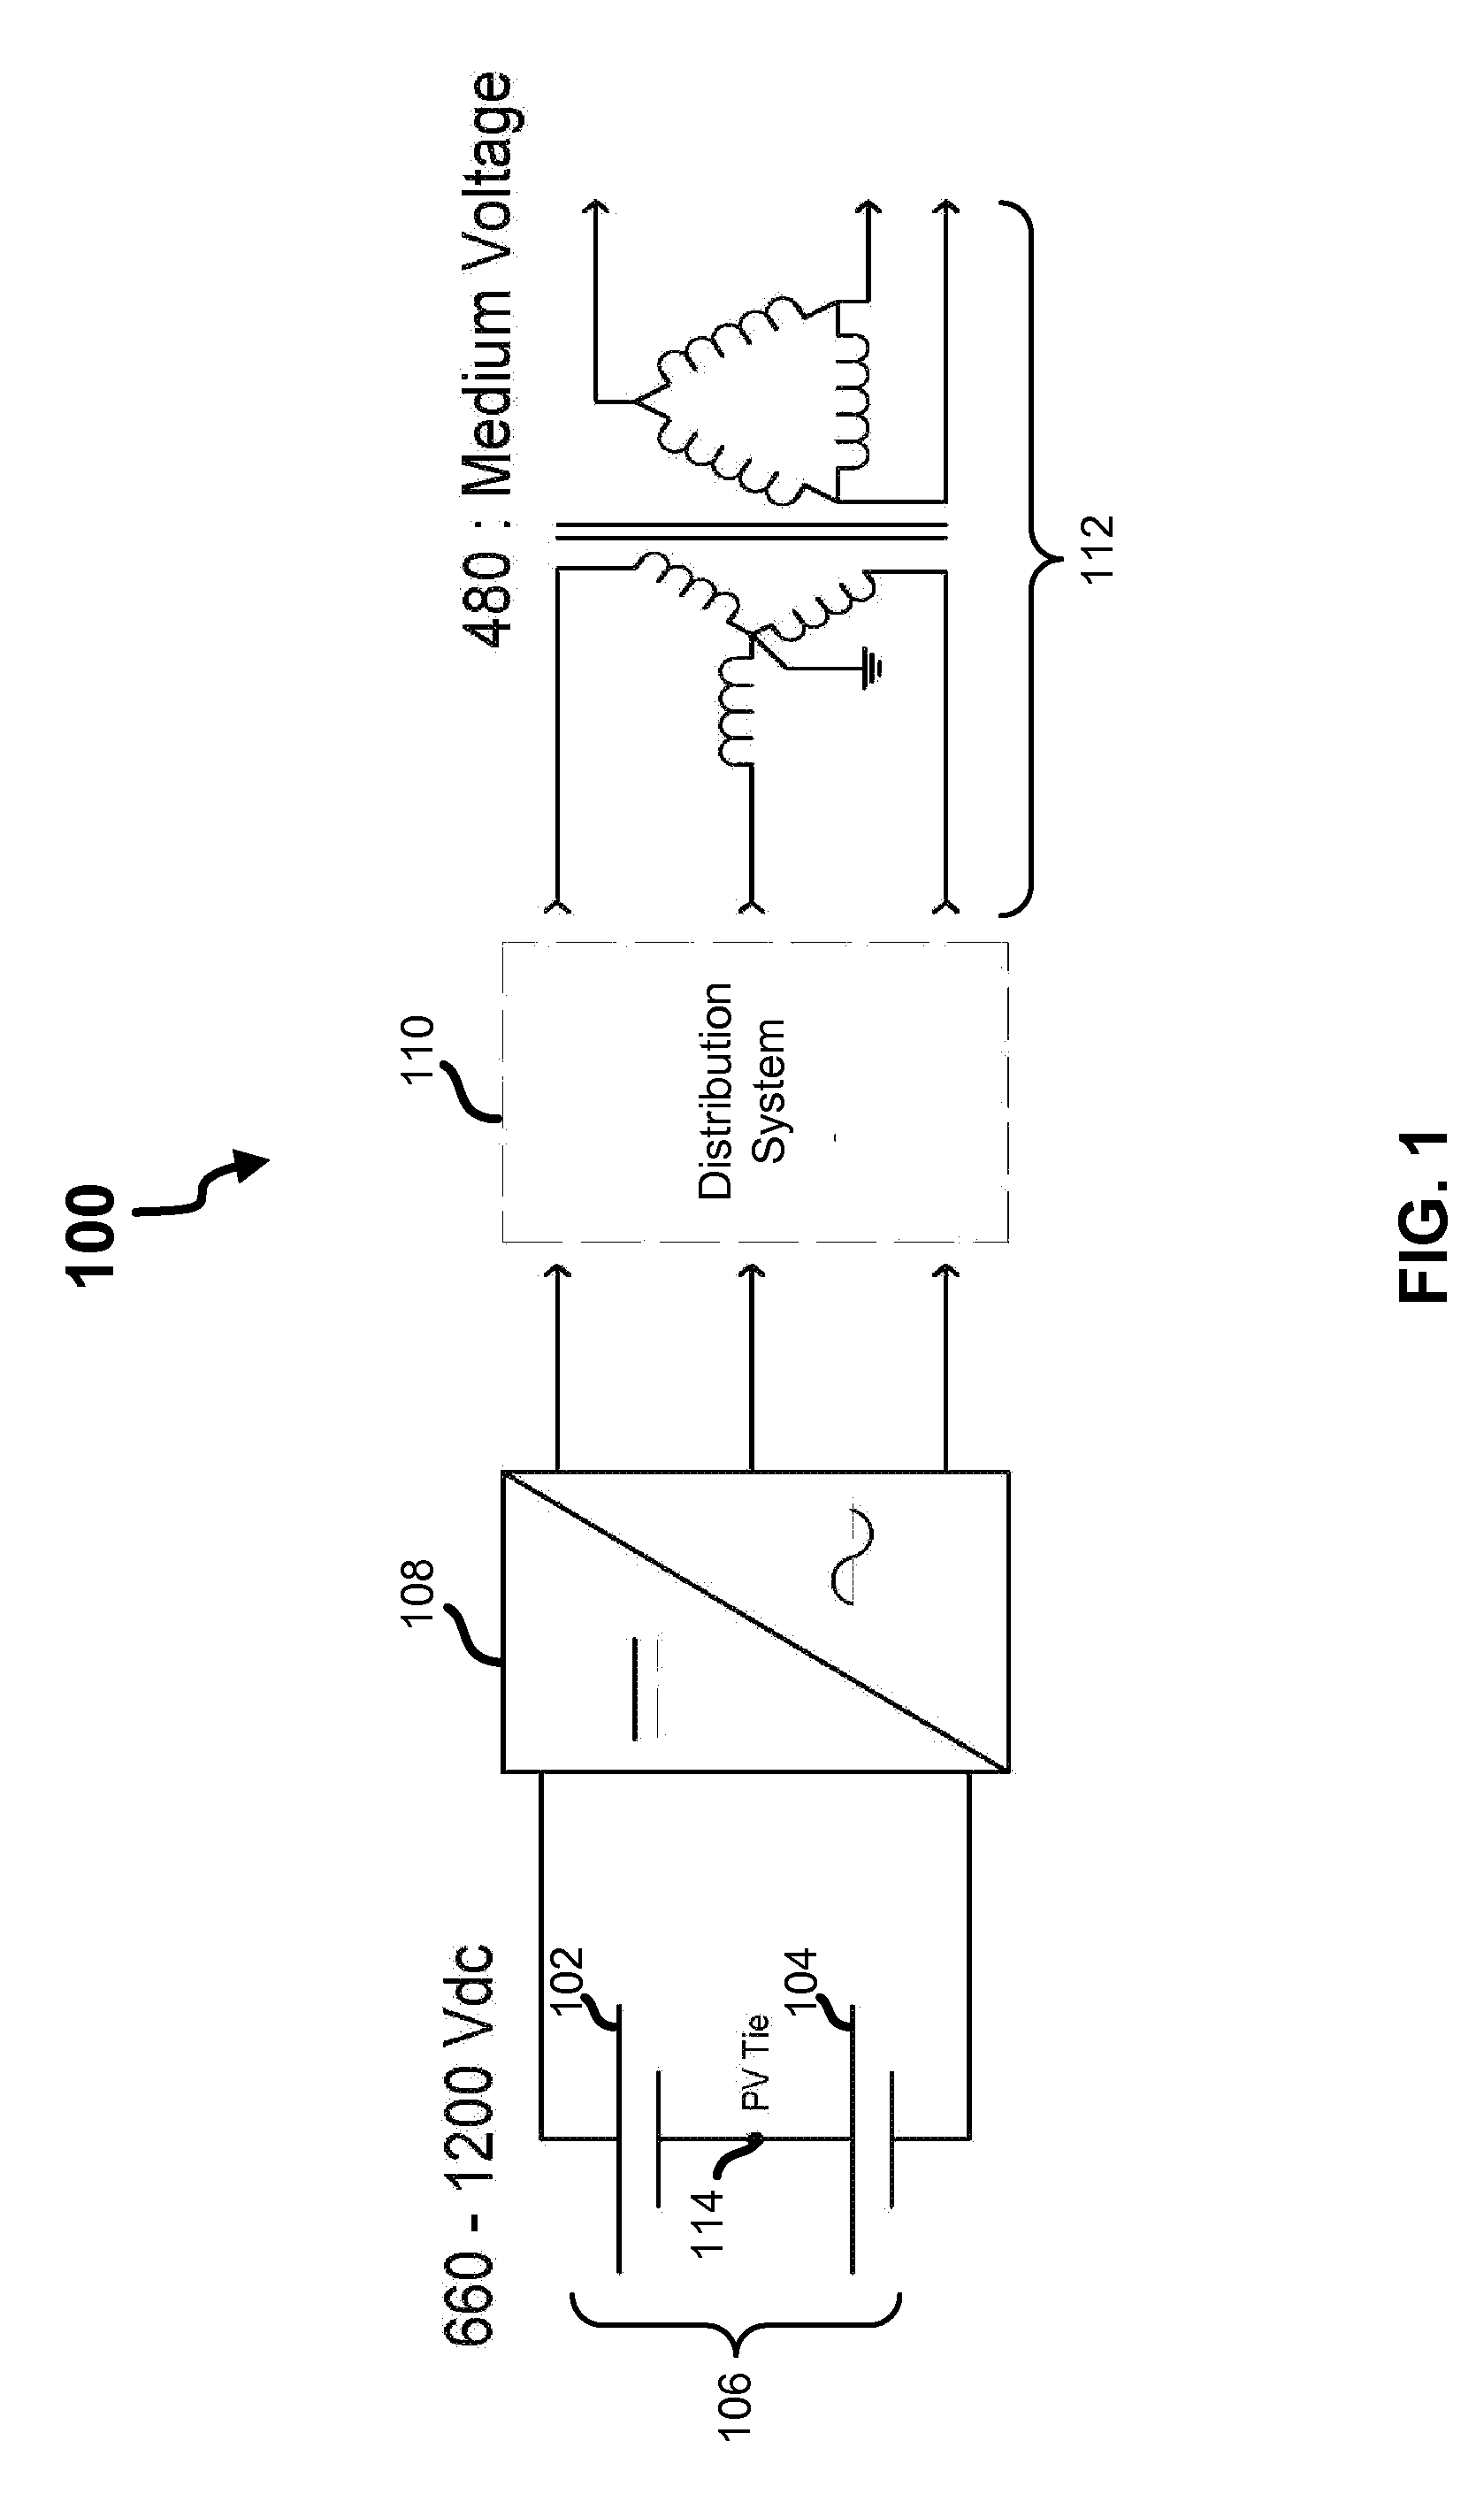 Common mode filter system and method for a solar power inverter